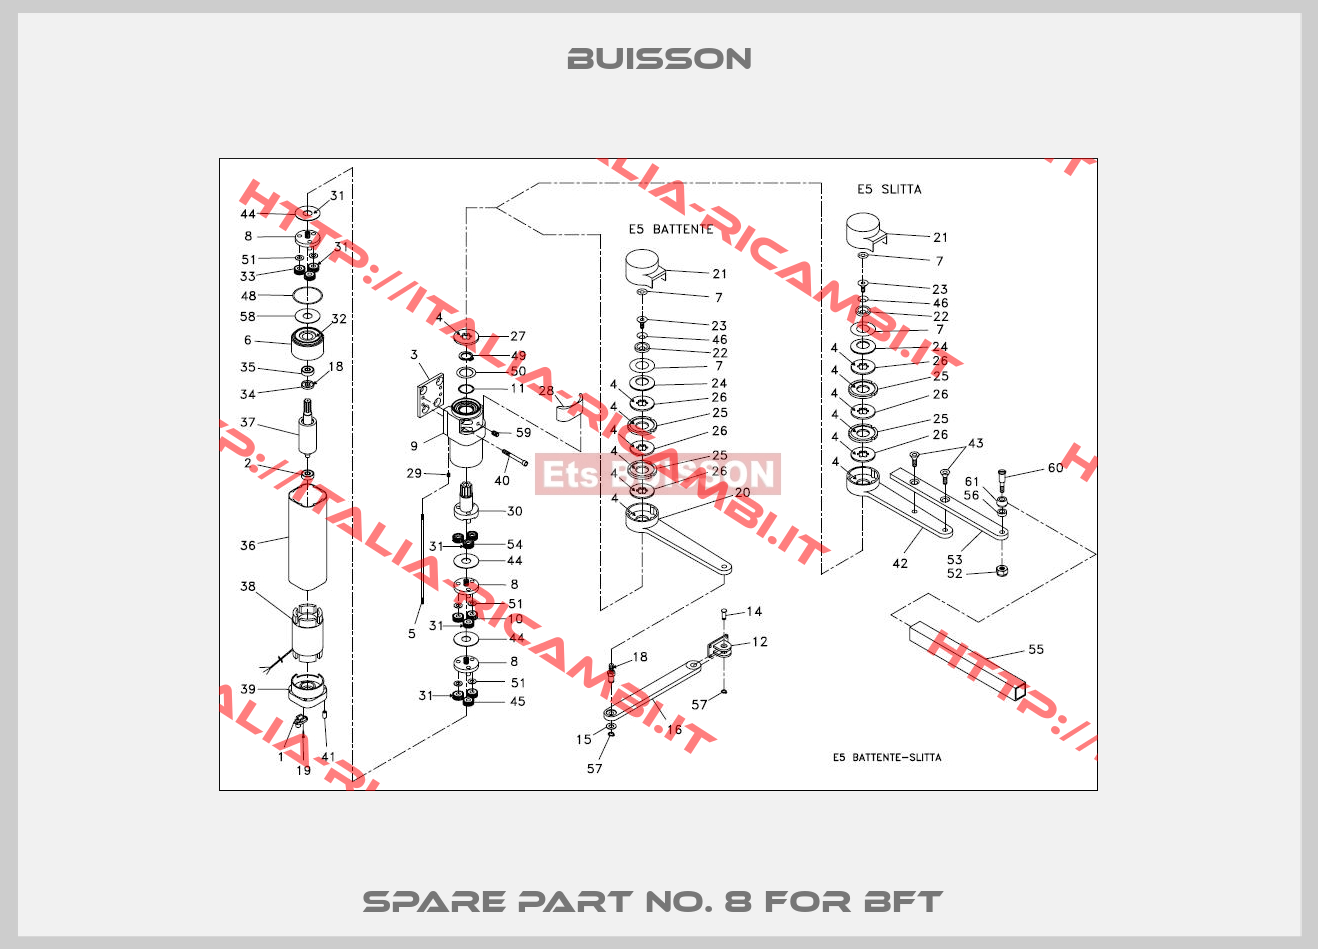 Spare part no. 8 for BFT -2